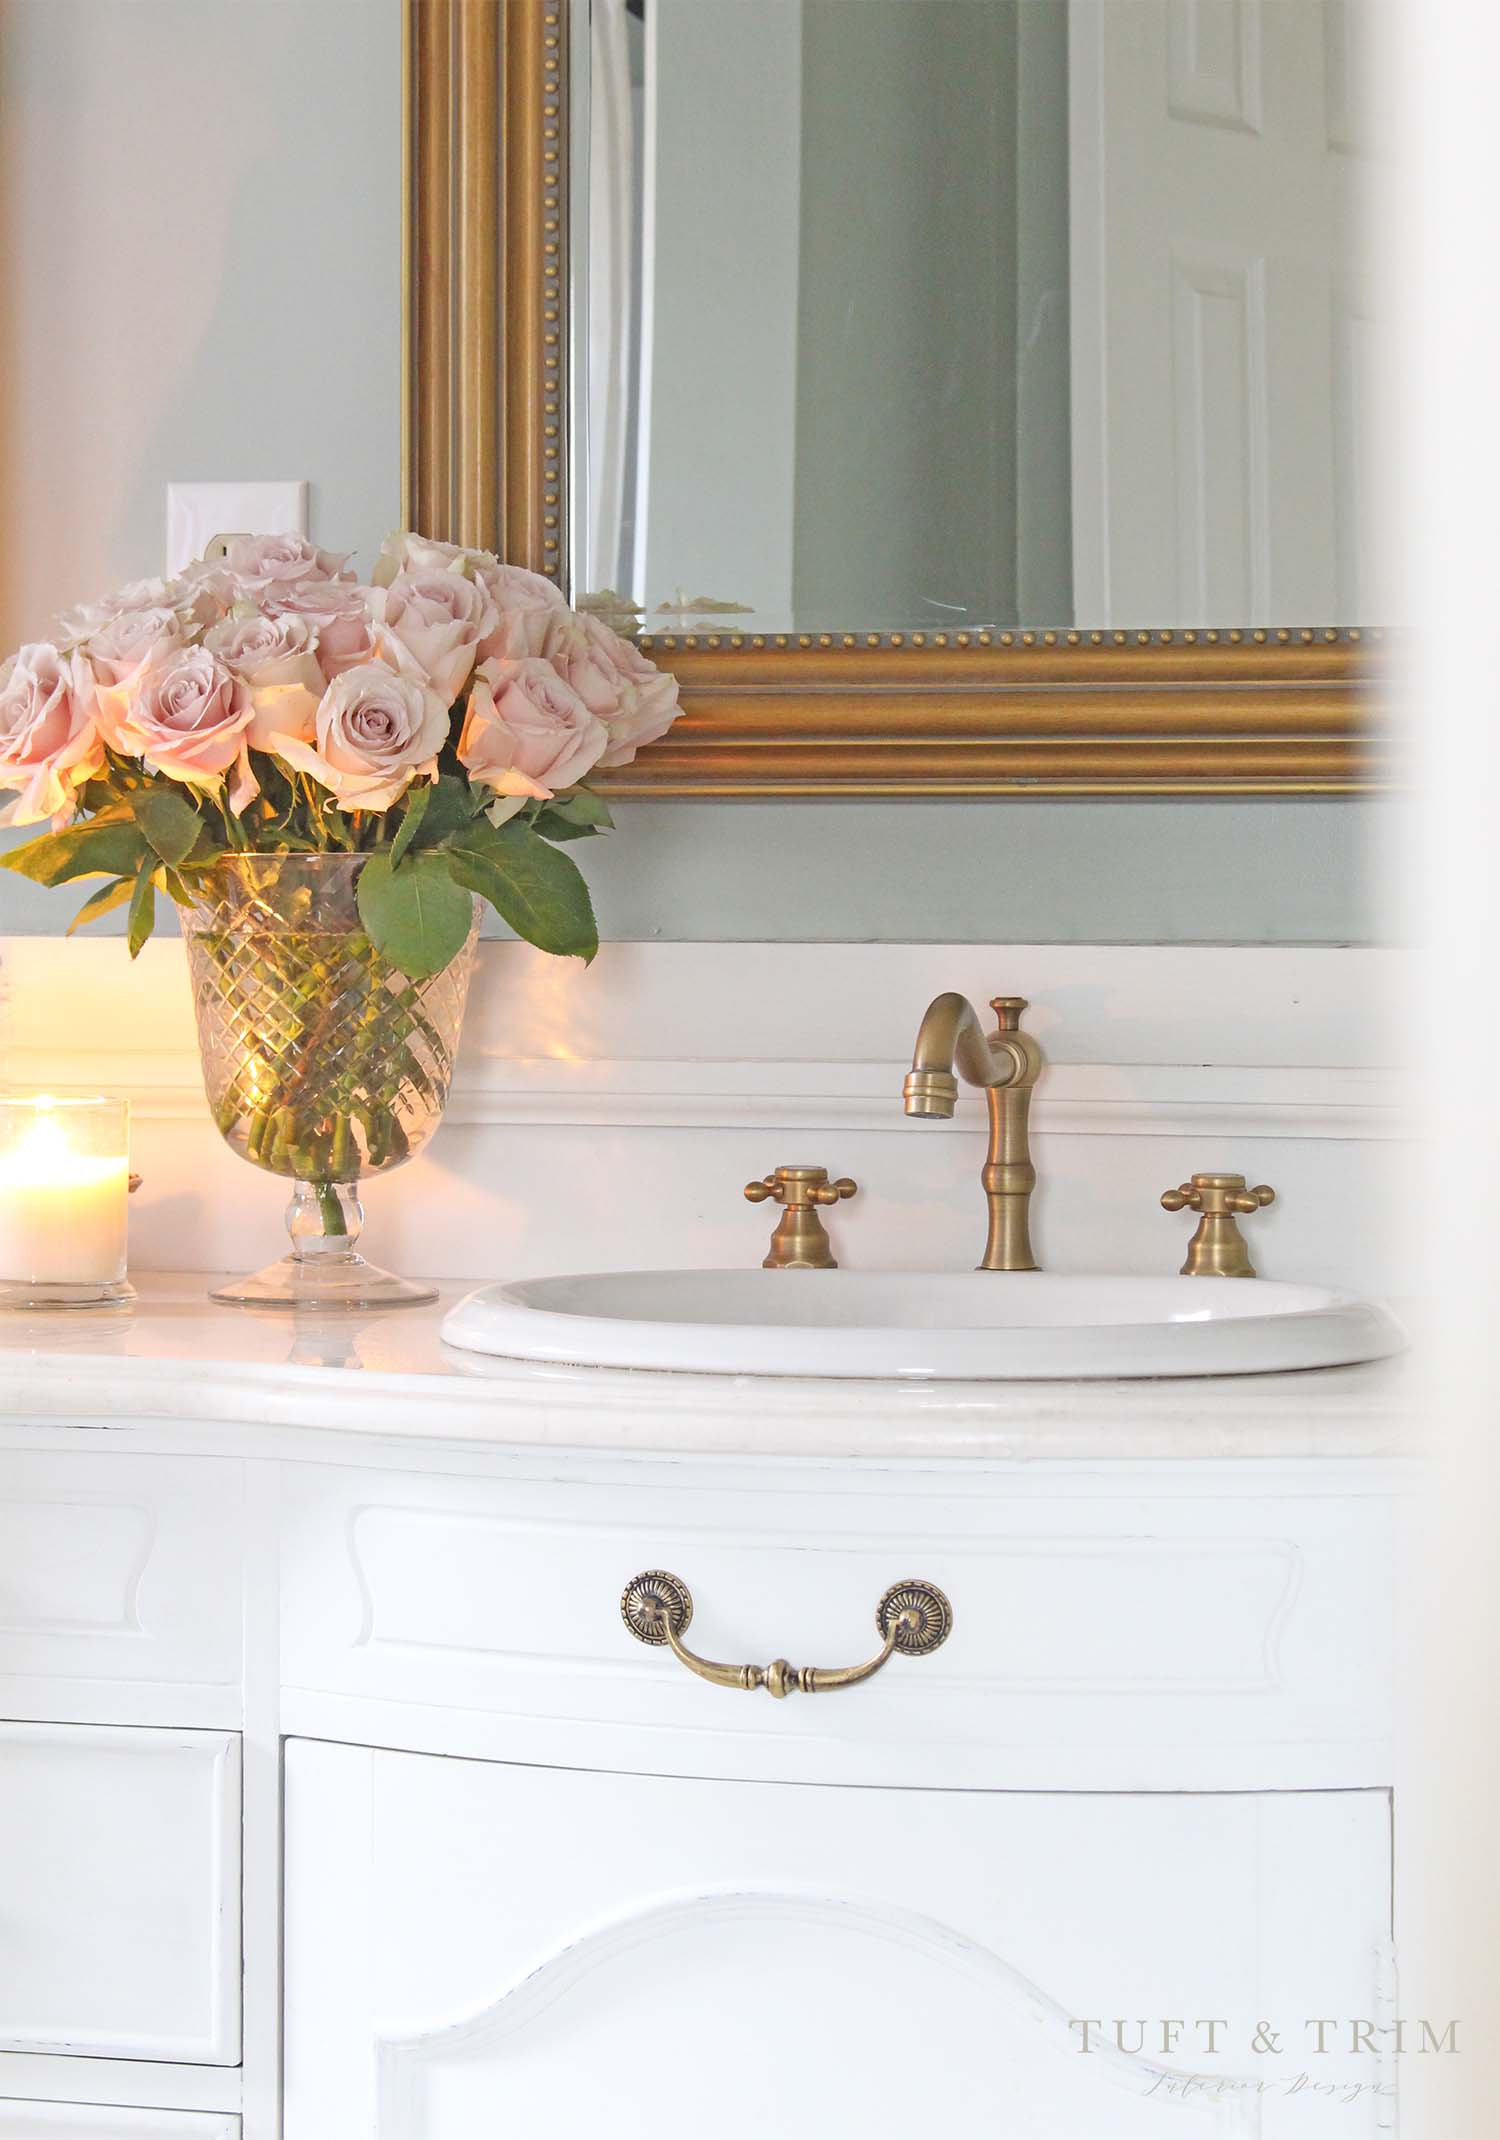 Bathroom Makeover with French Green & Antique Gold